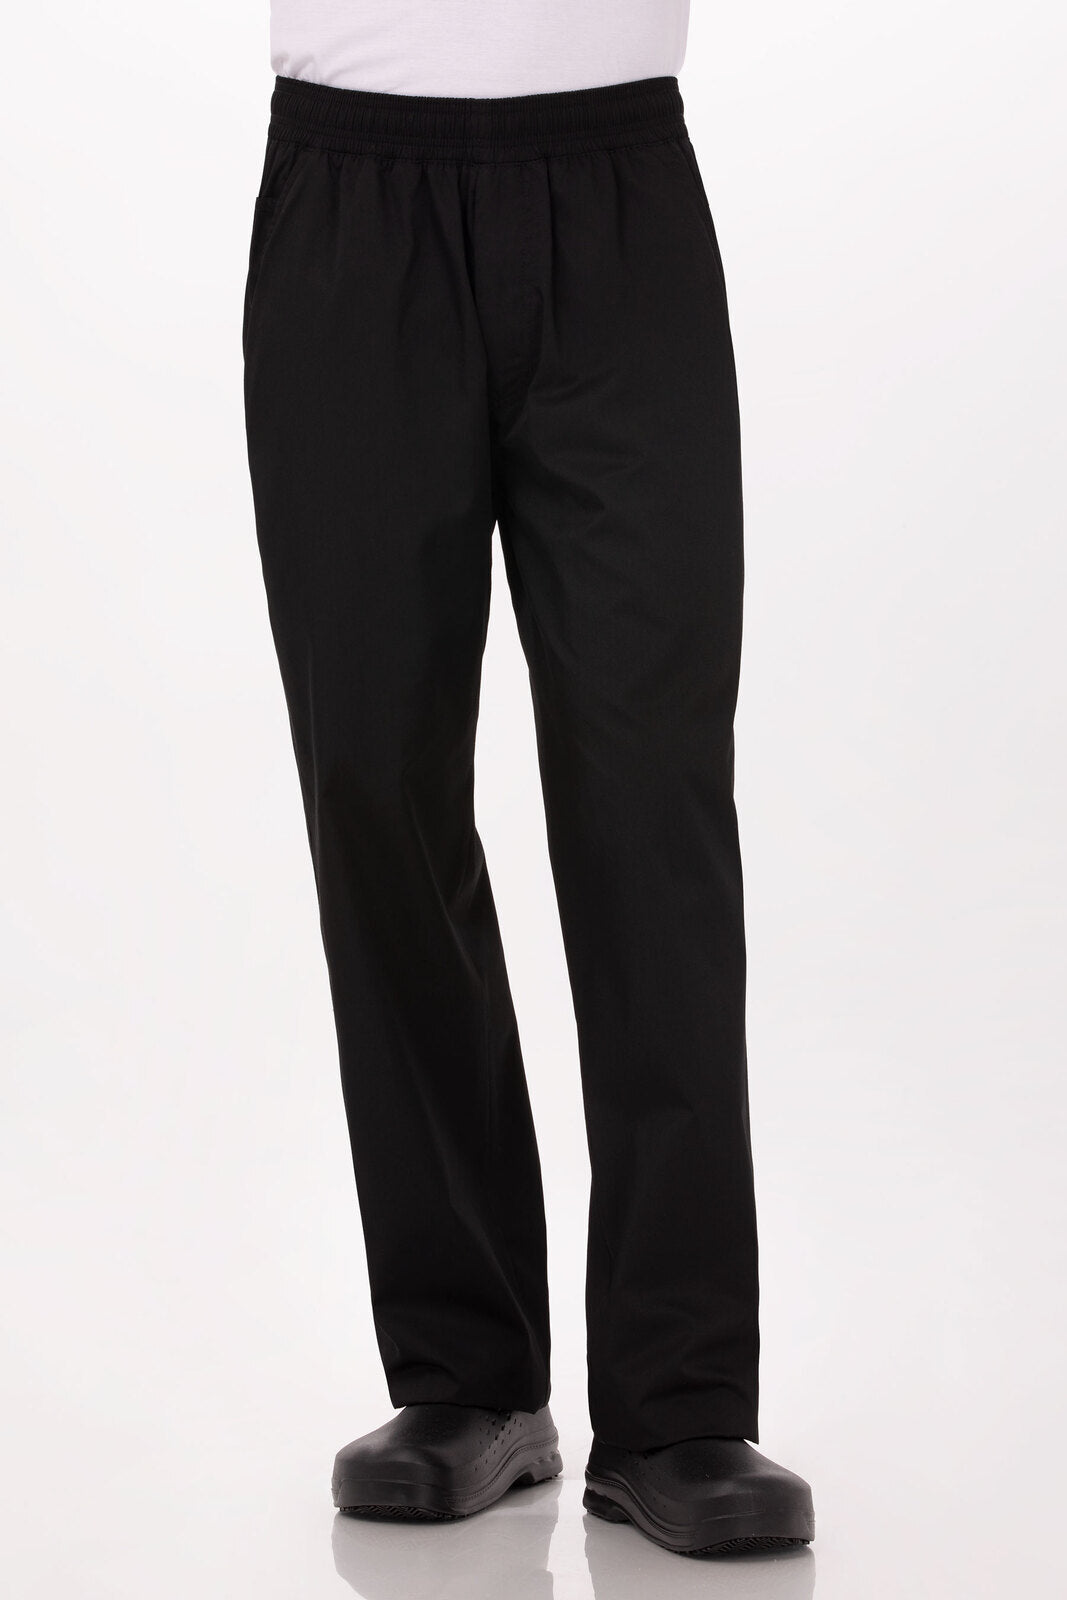 Chef Works Lightweight Baggy Pants (BBLW)